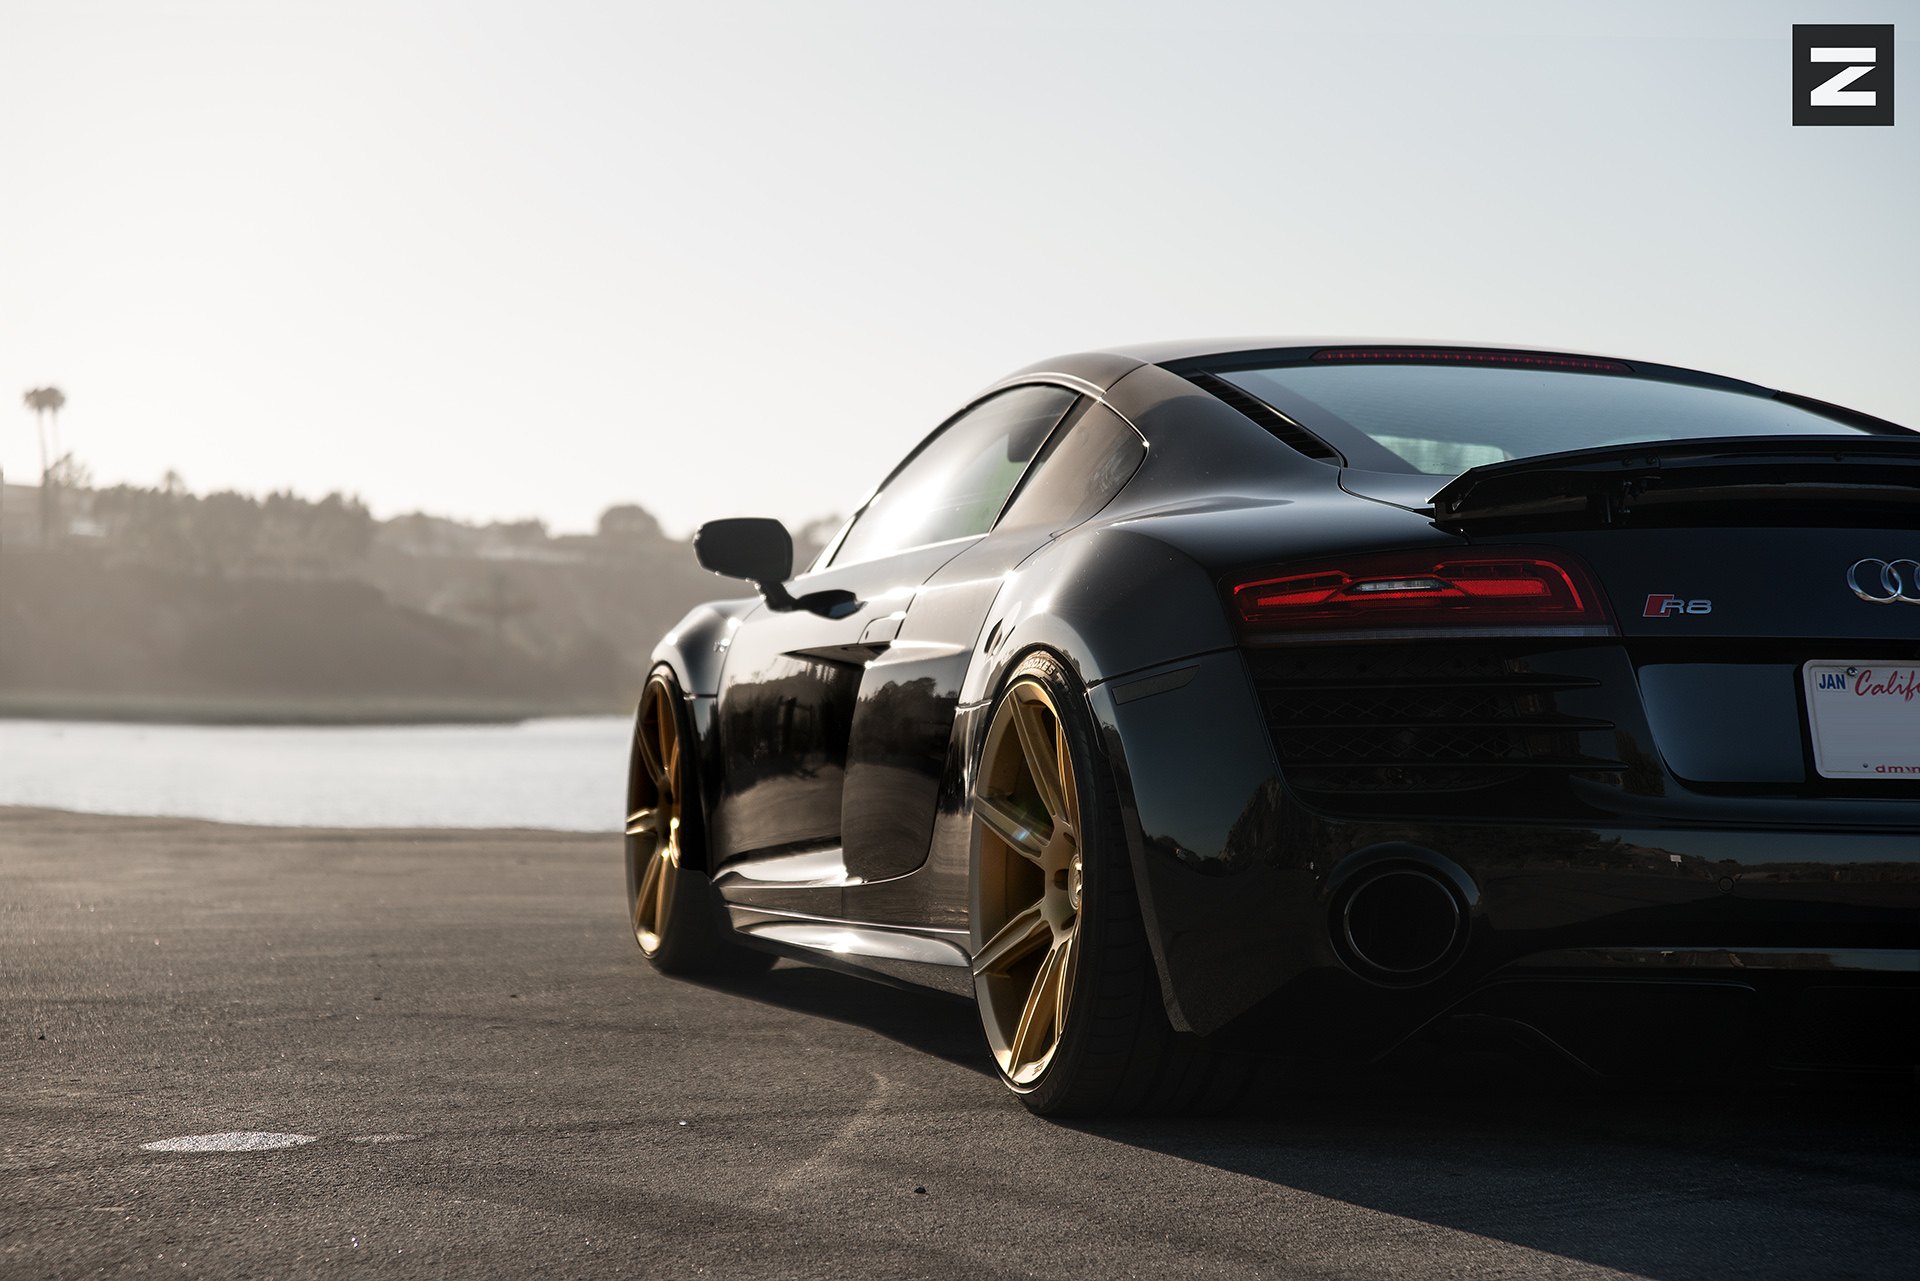 Aftermarket Rear Diffuser on Black Audi R8 - Photo by Zito Wheels